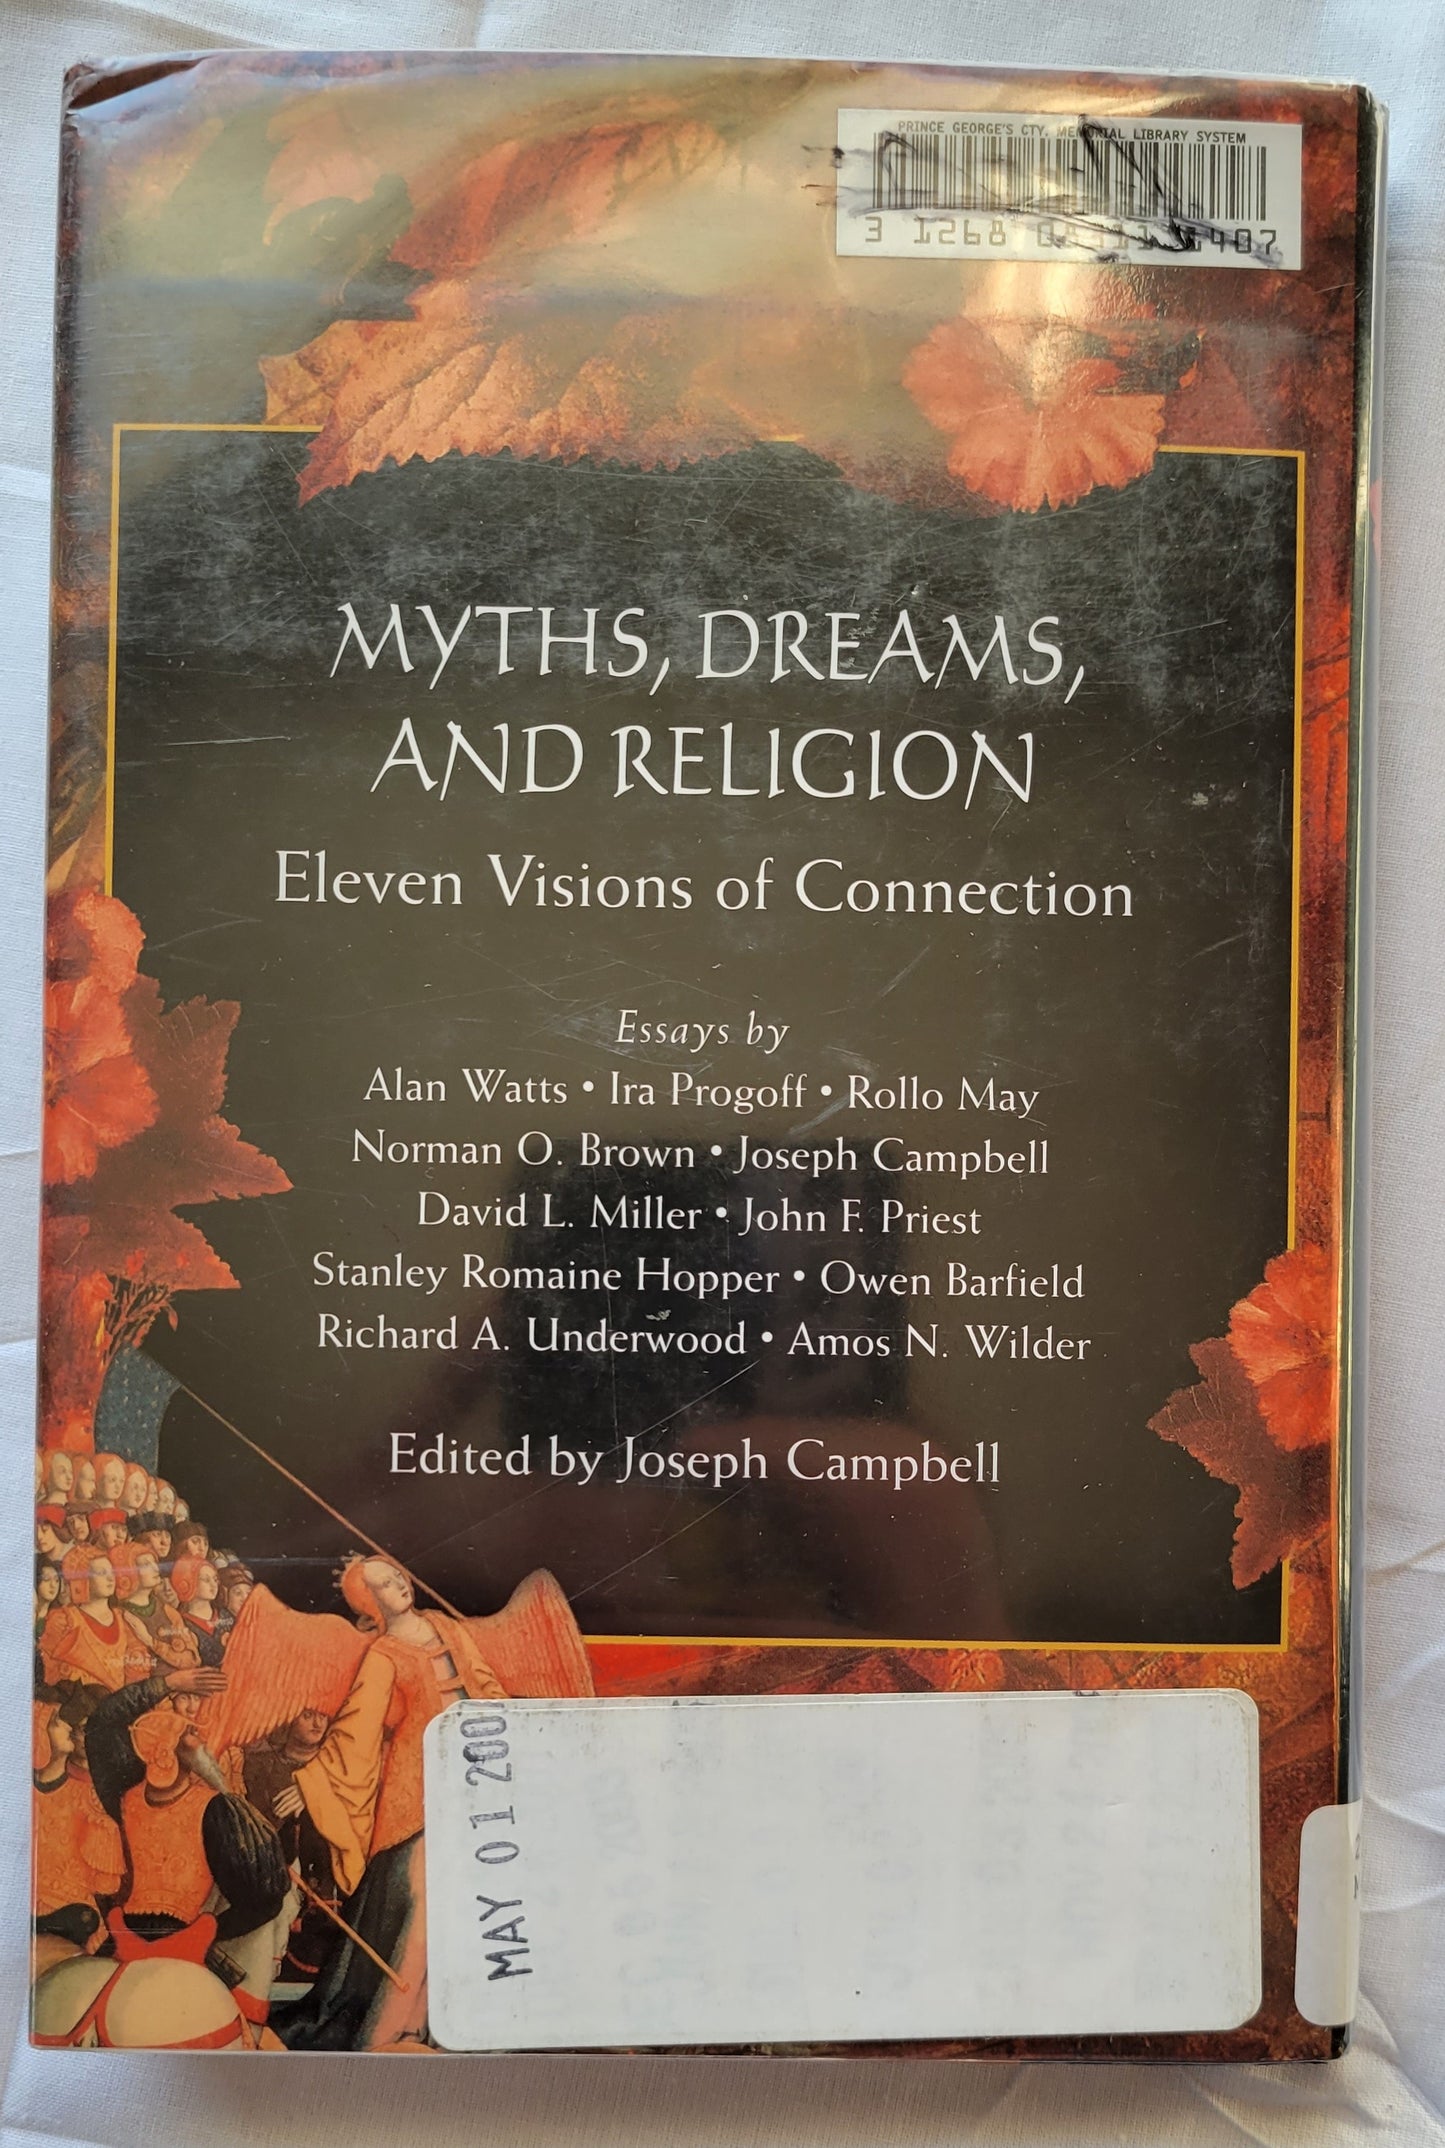 Used book for sale, "Myths, Dreams, and Religion" is a collection of essays by various authors - including Alan Watts, John F. Priest, and more - and is edited by the famous Joseph Campbell. View of back cover.